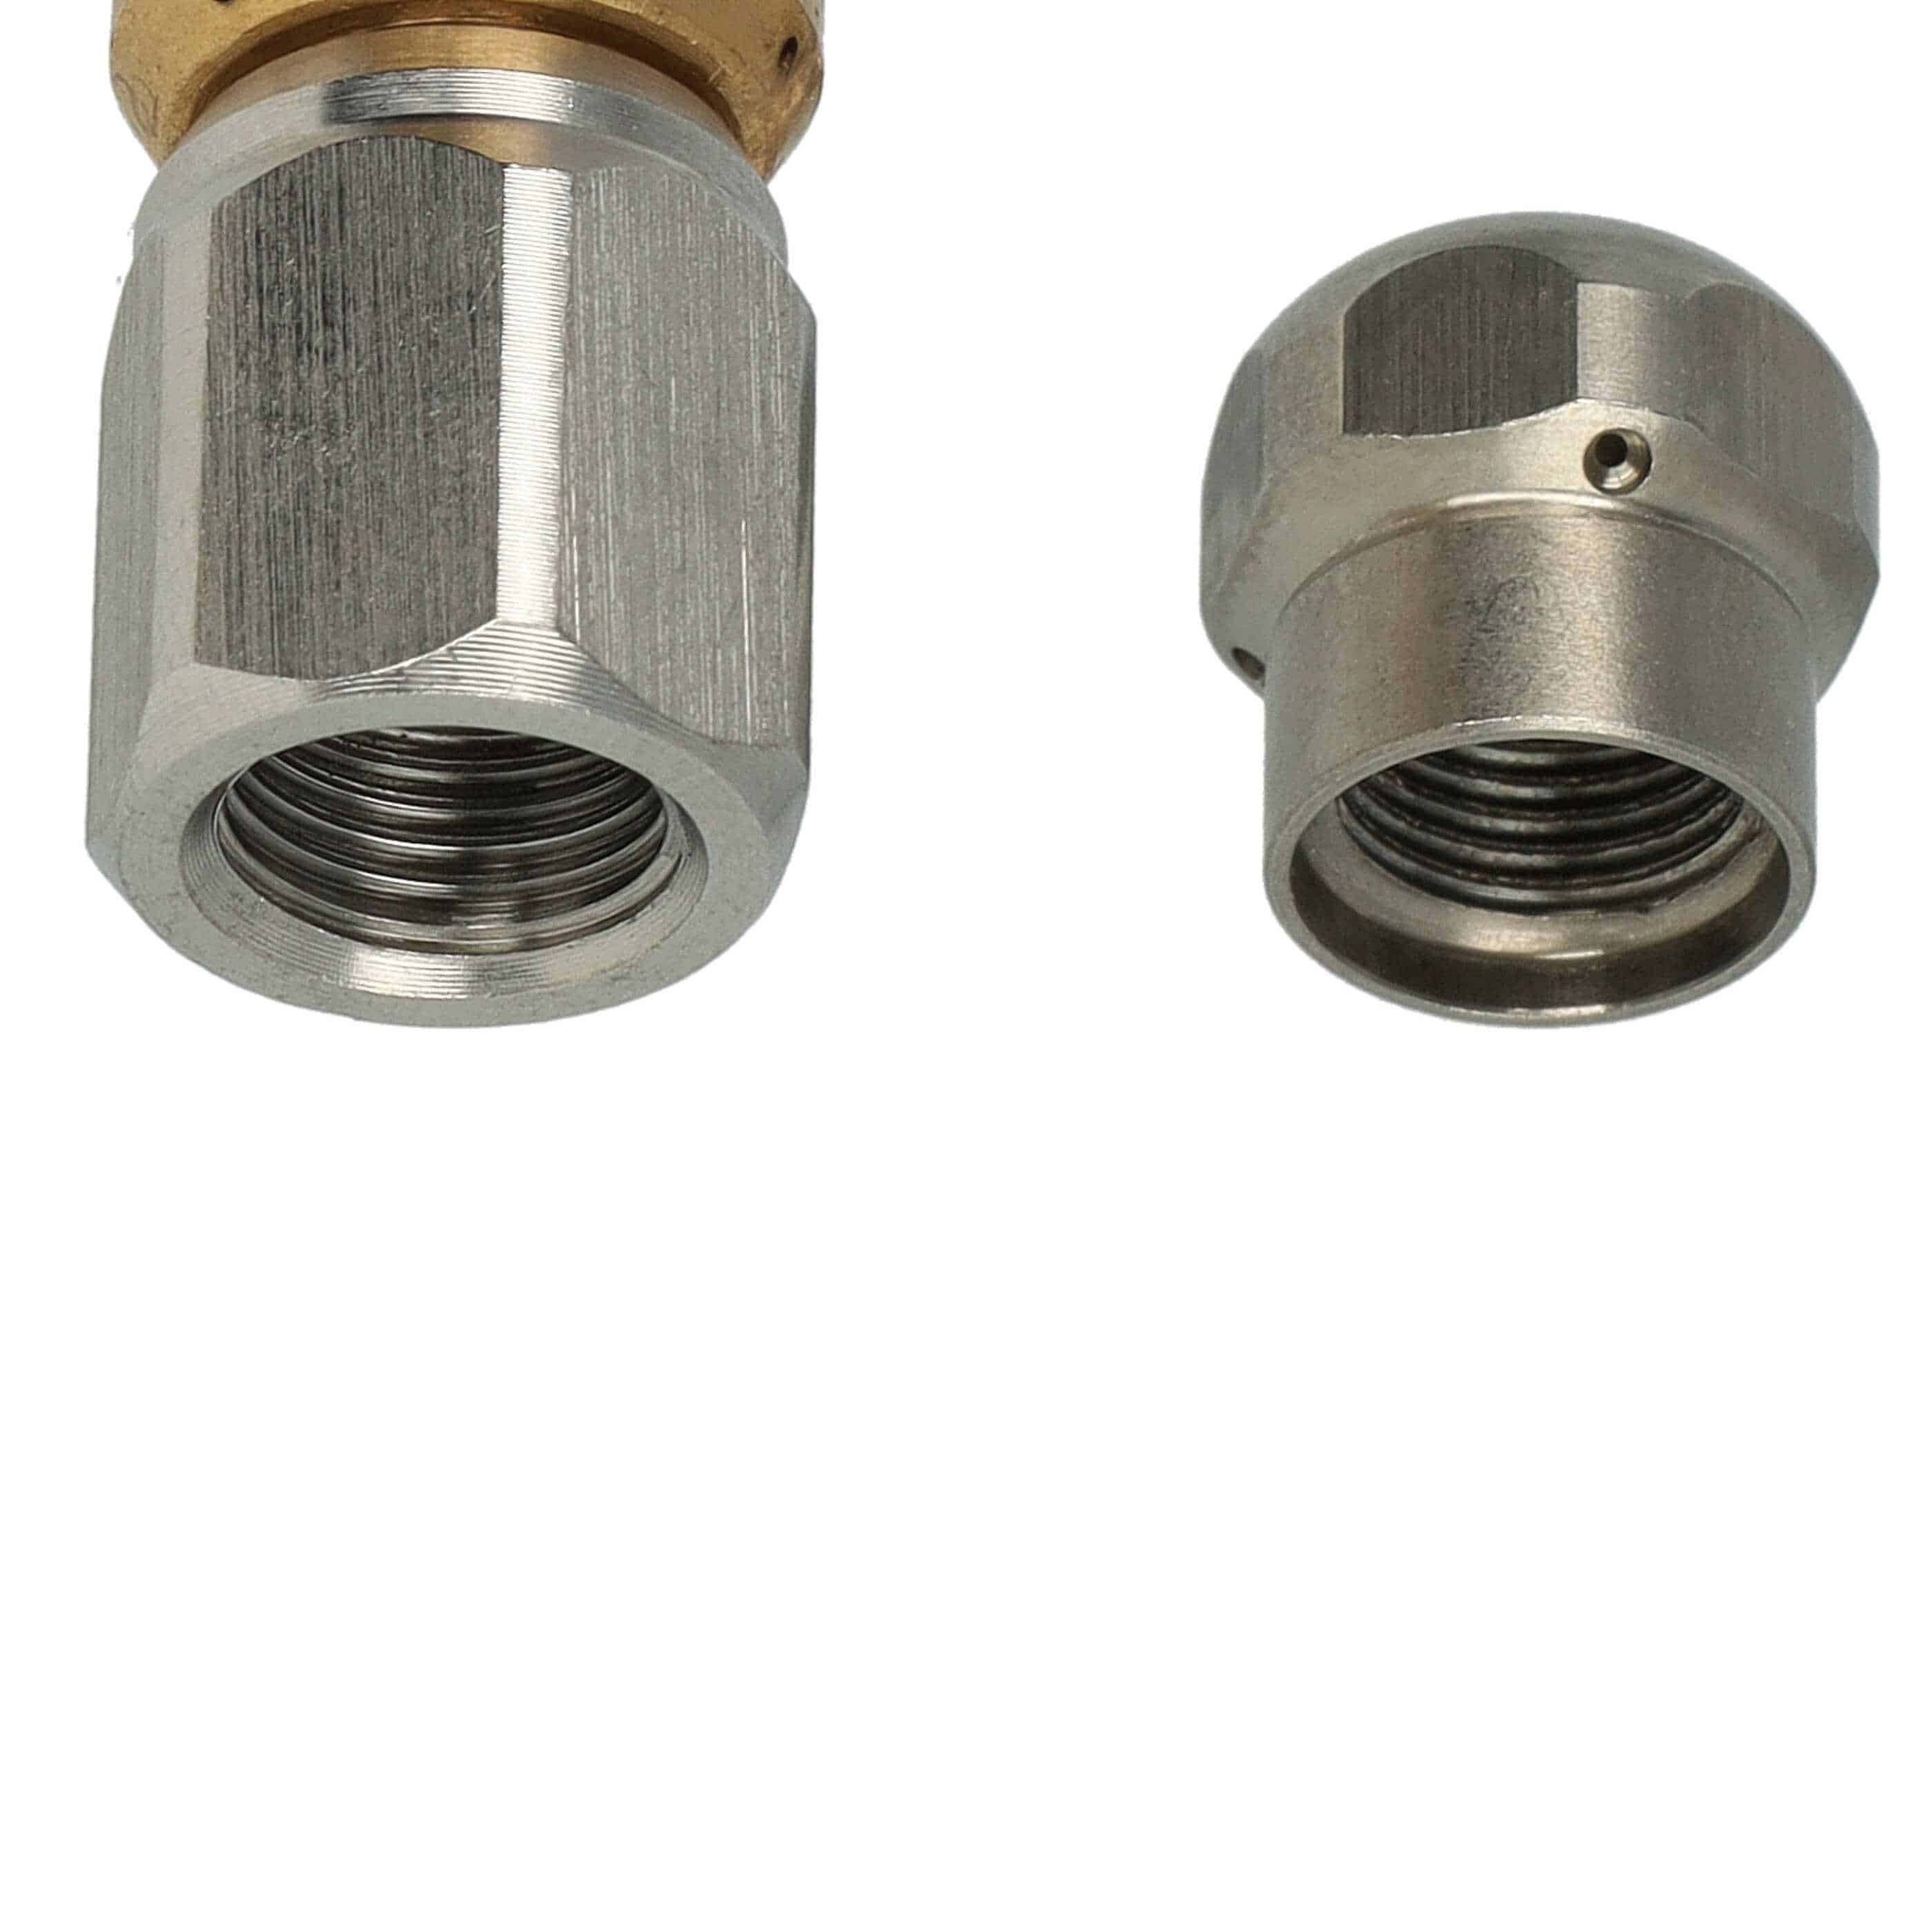 2x Pipe Cleaning Nozzles as Replacement for Kränzle KNF045 - Stainless Steel, Fixed + Rotatable